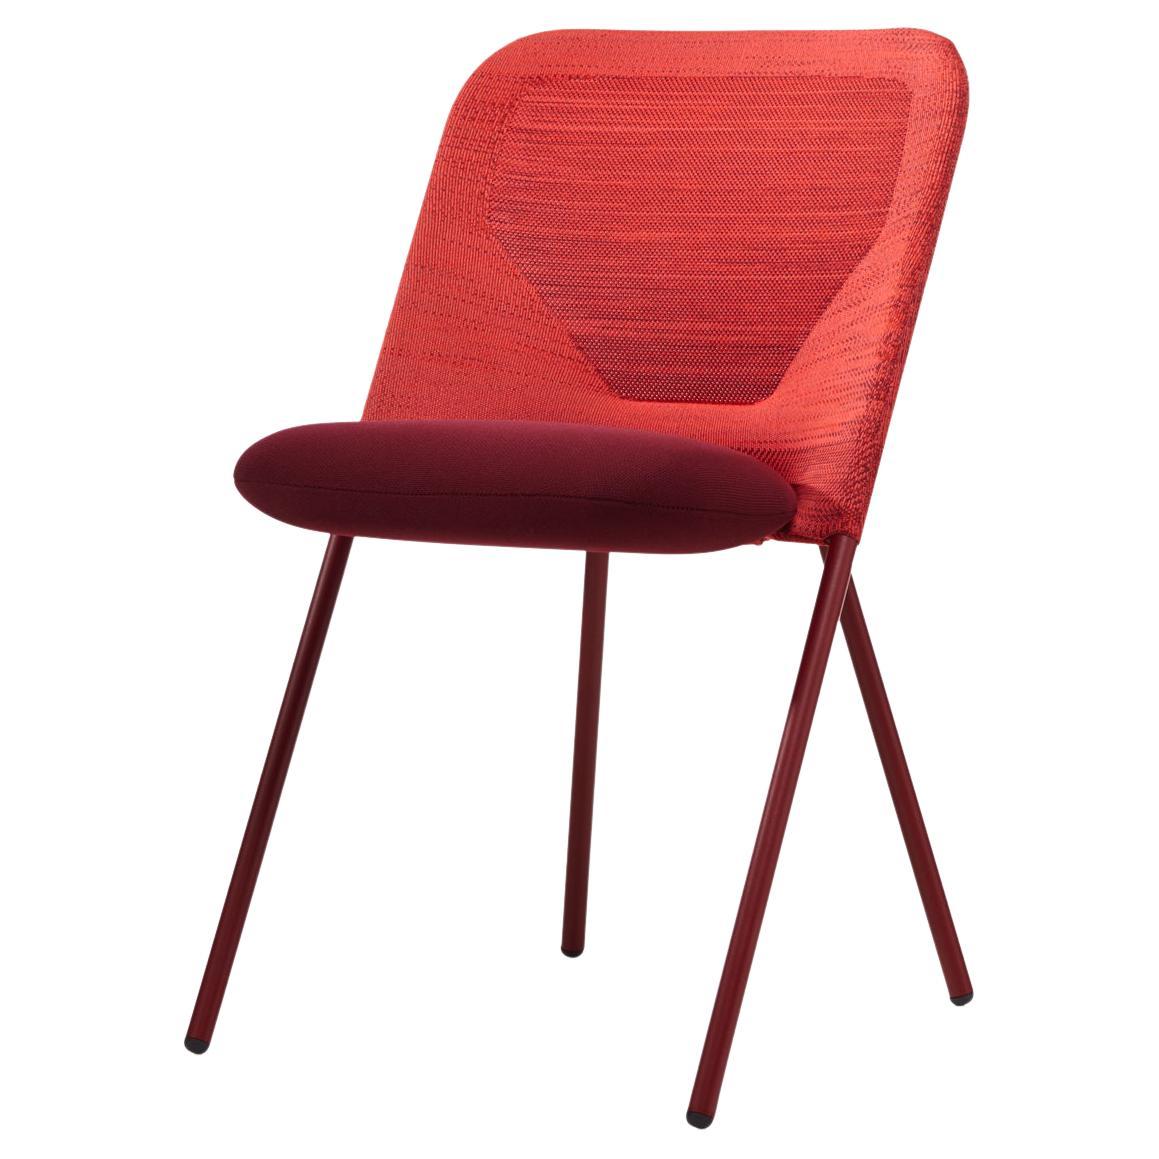 Moooi Shift Dining Chair with Bright Red Steel Frame and Knitted Backrest For Sale